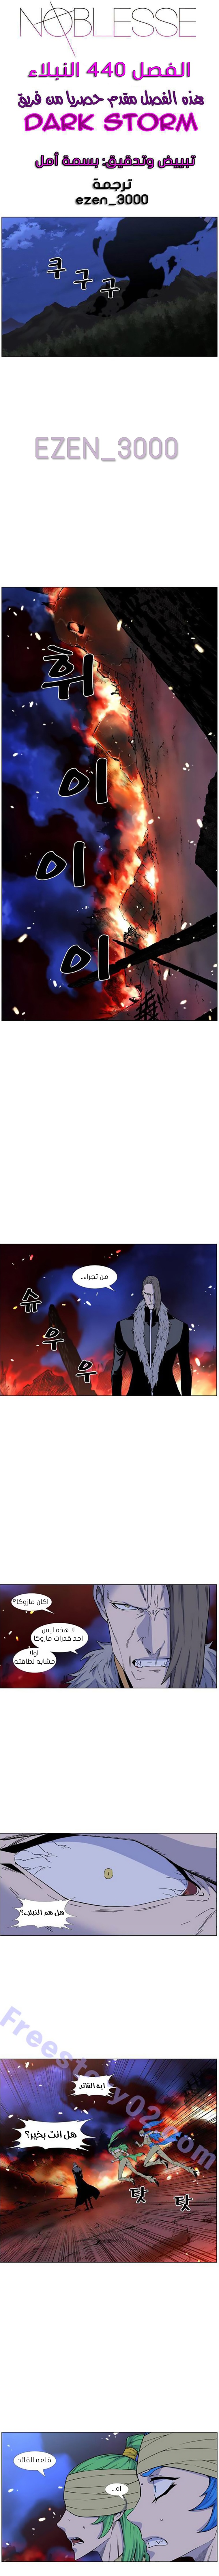 Noblesse: Chapter 440 - Page 1